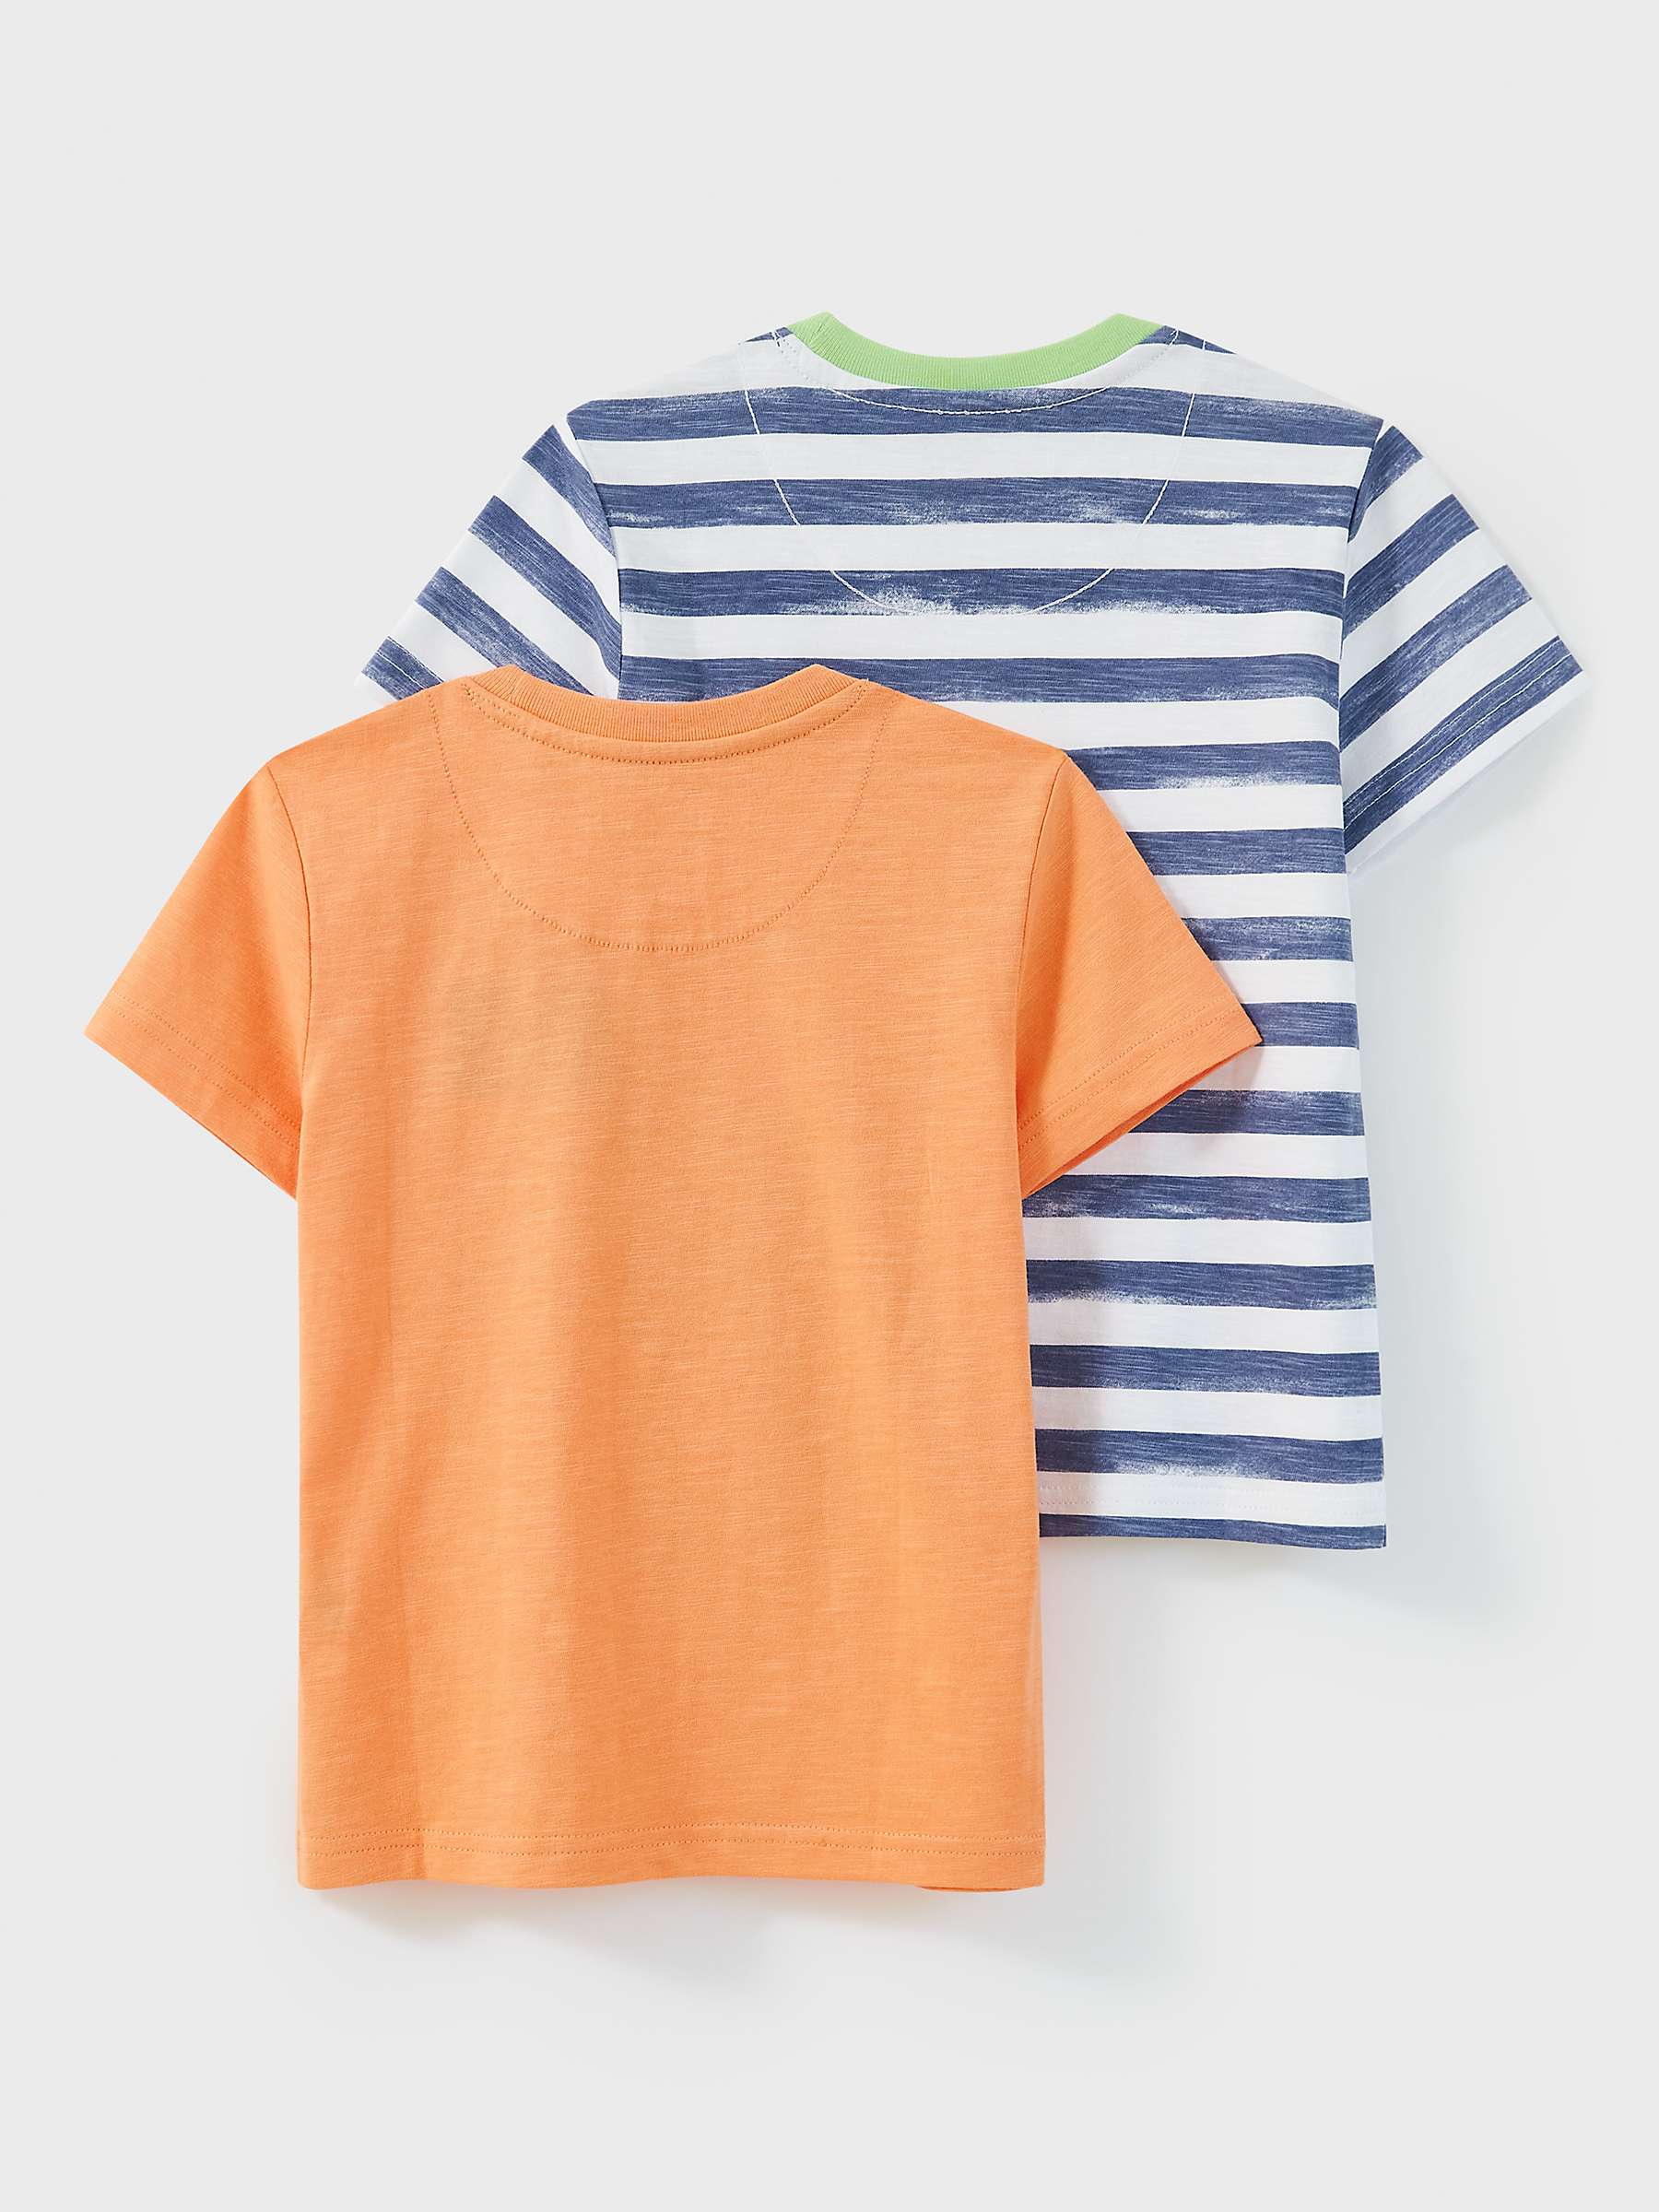 Buy Crew Clothing Kids' Whale Stripe Short Sleeve T-Shirt, Pack of 2, Multi Online at johnlewis.com